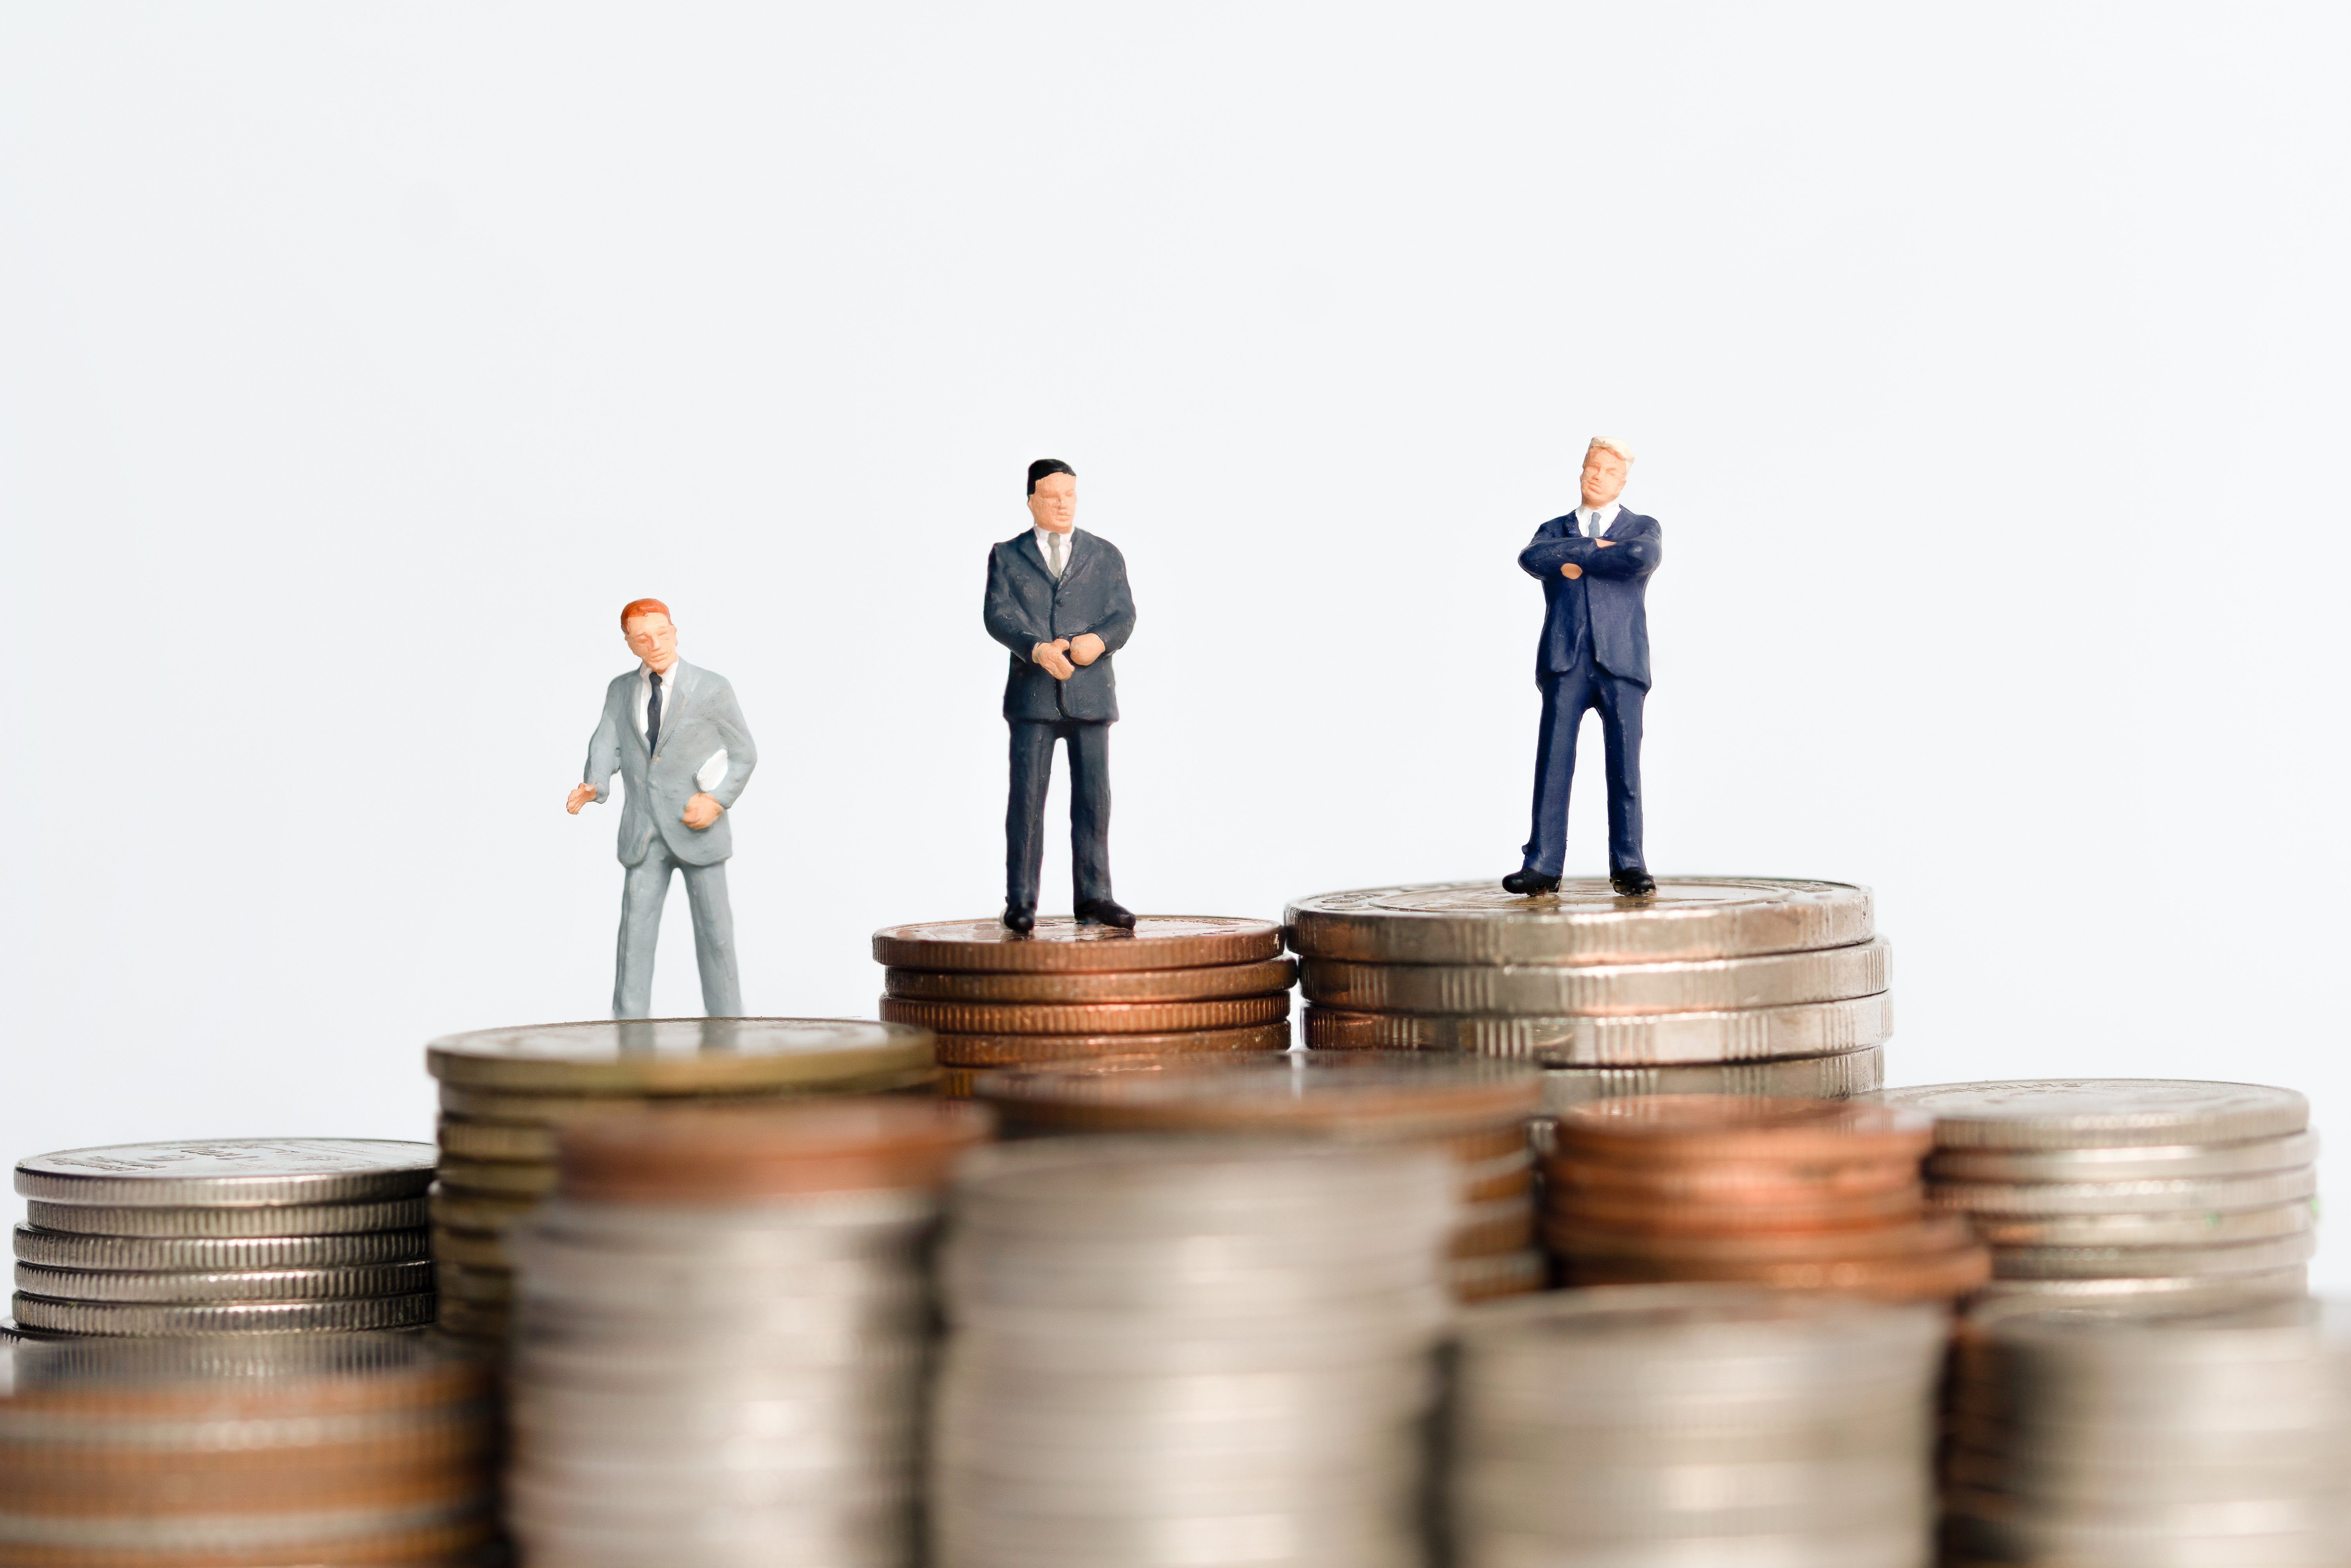 Mini figure people : Small businessman standing on step or stack coins with blurred background for financial concept